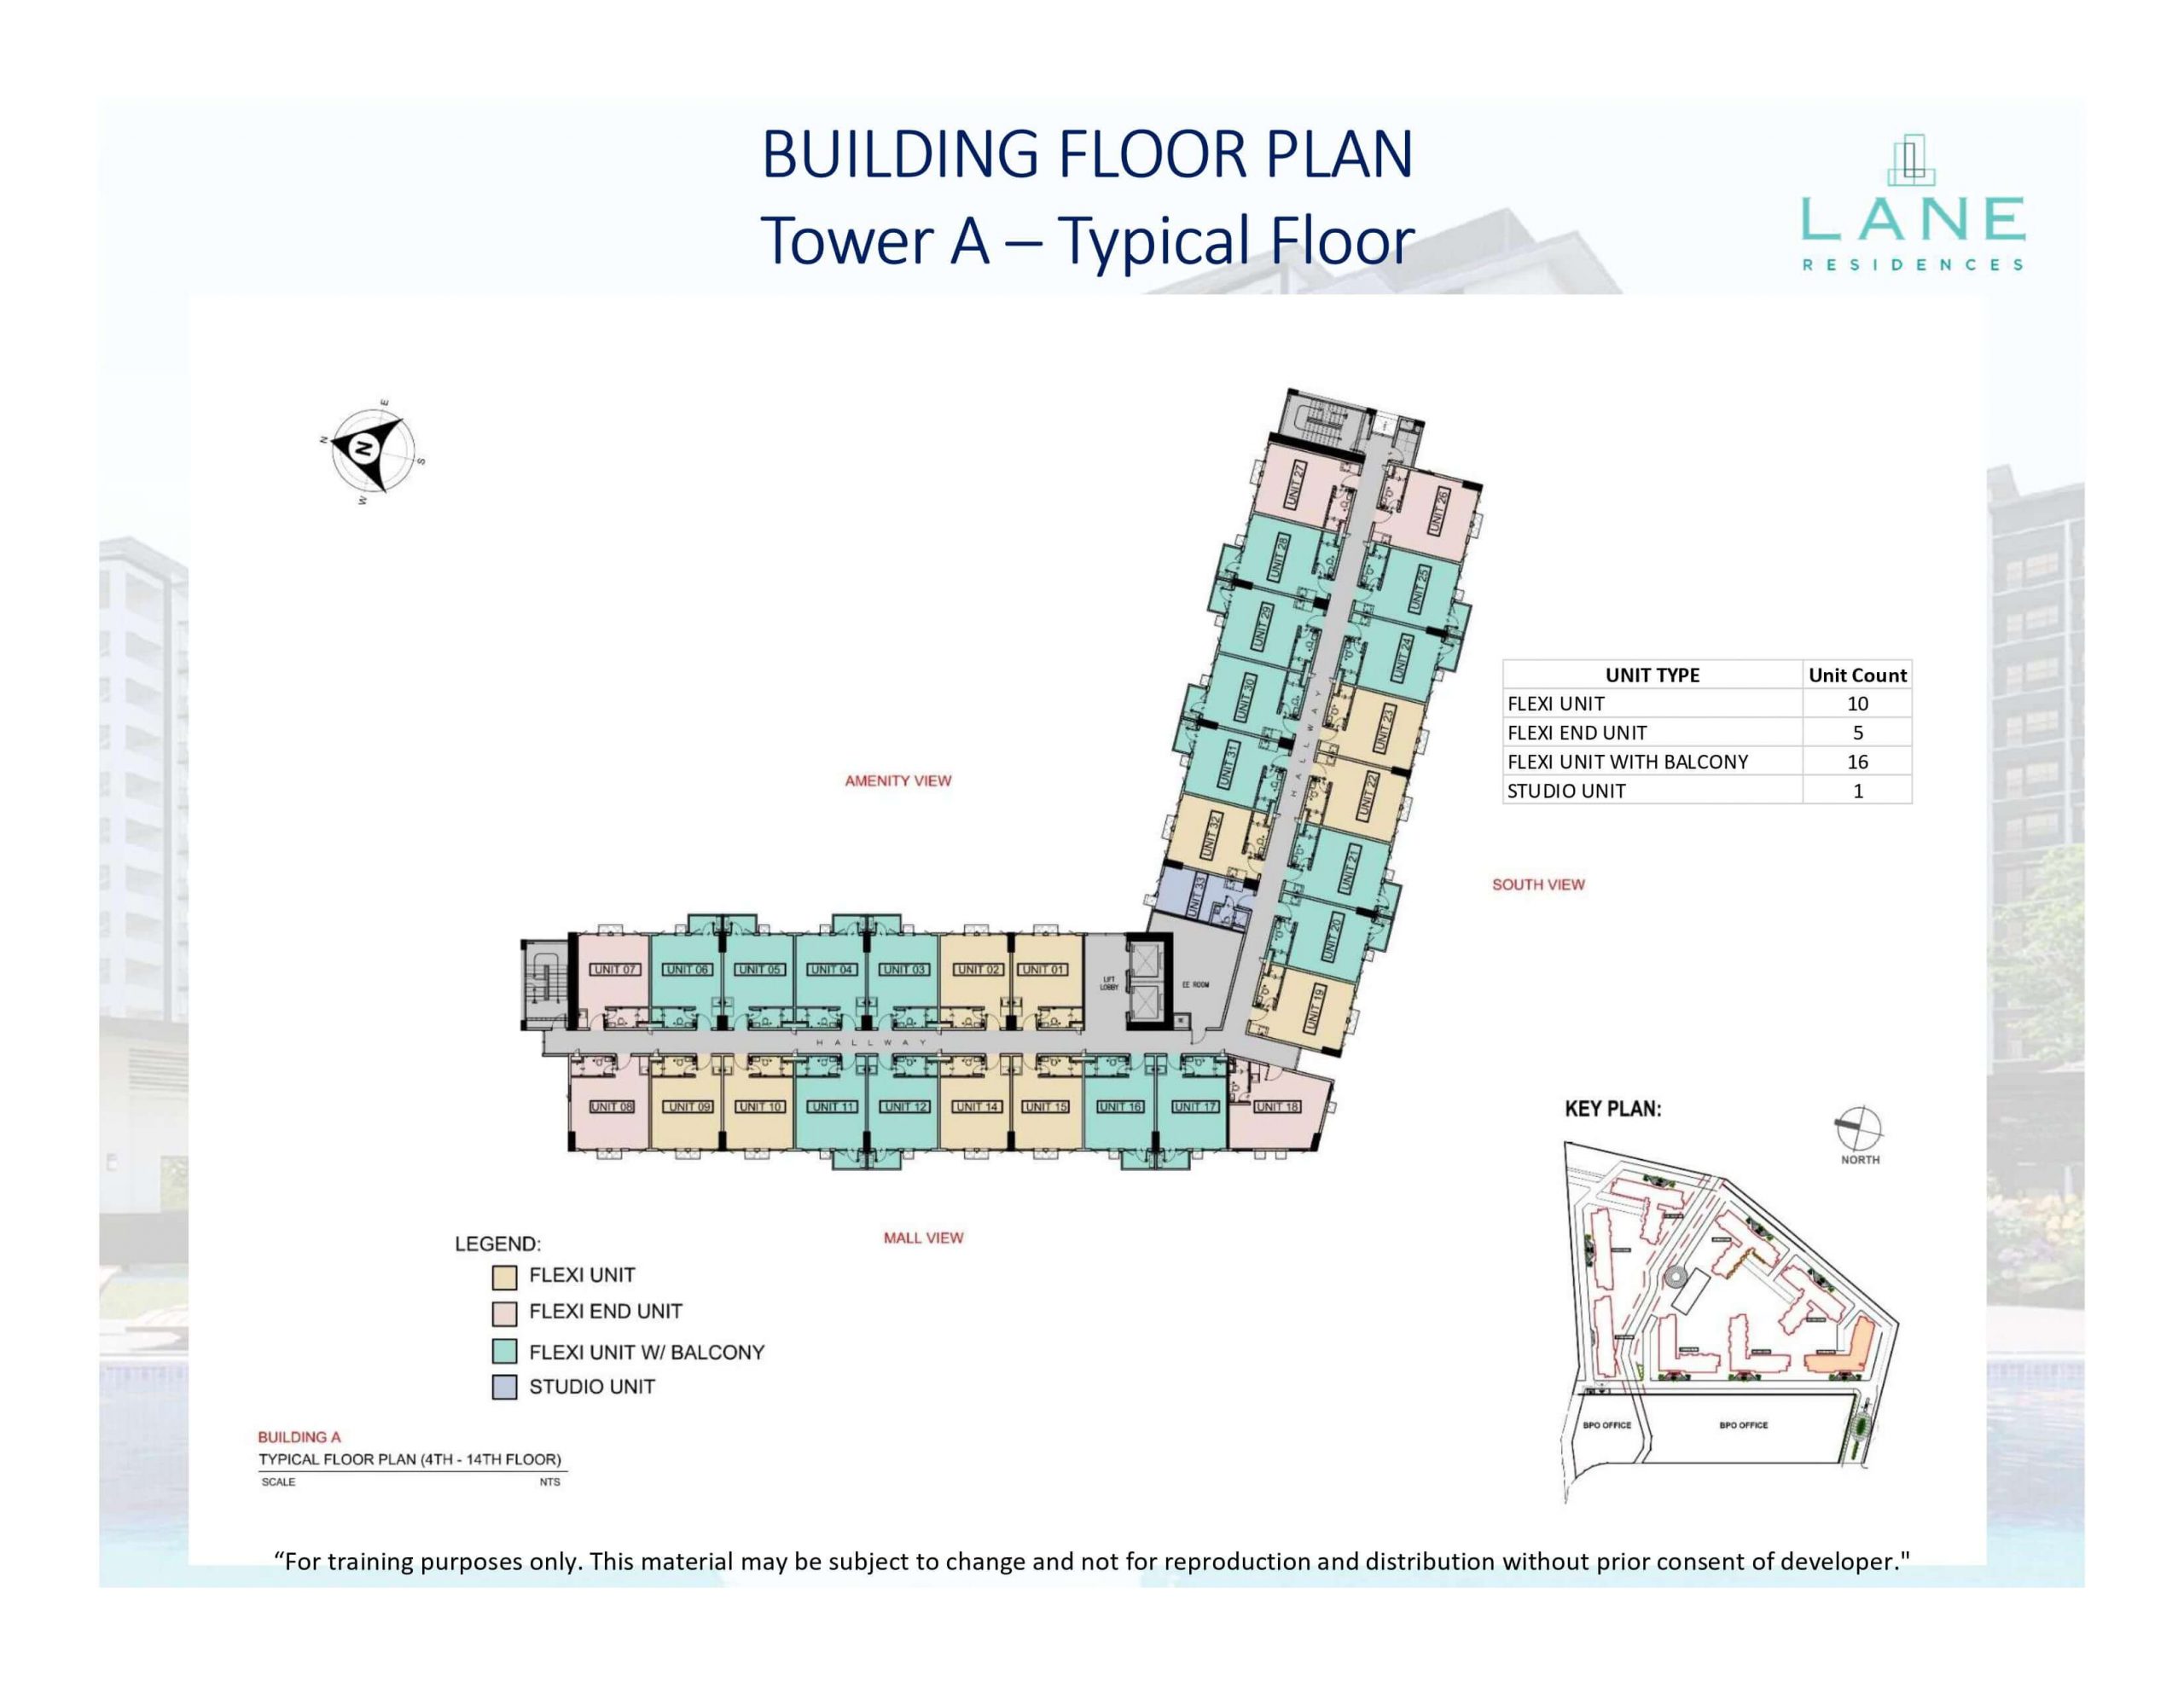 Tower A - Typical Floor